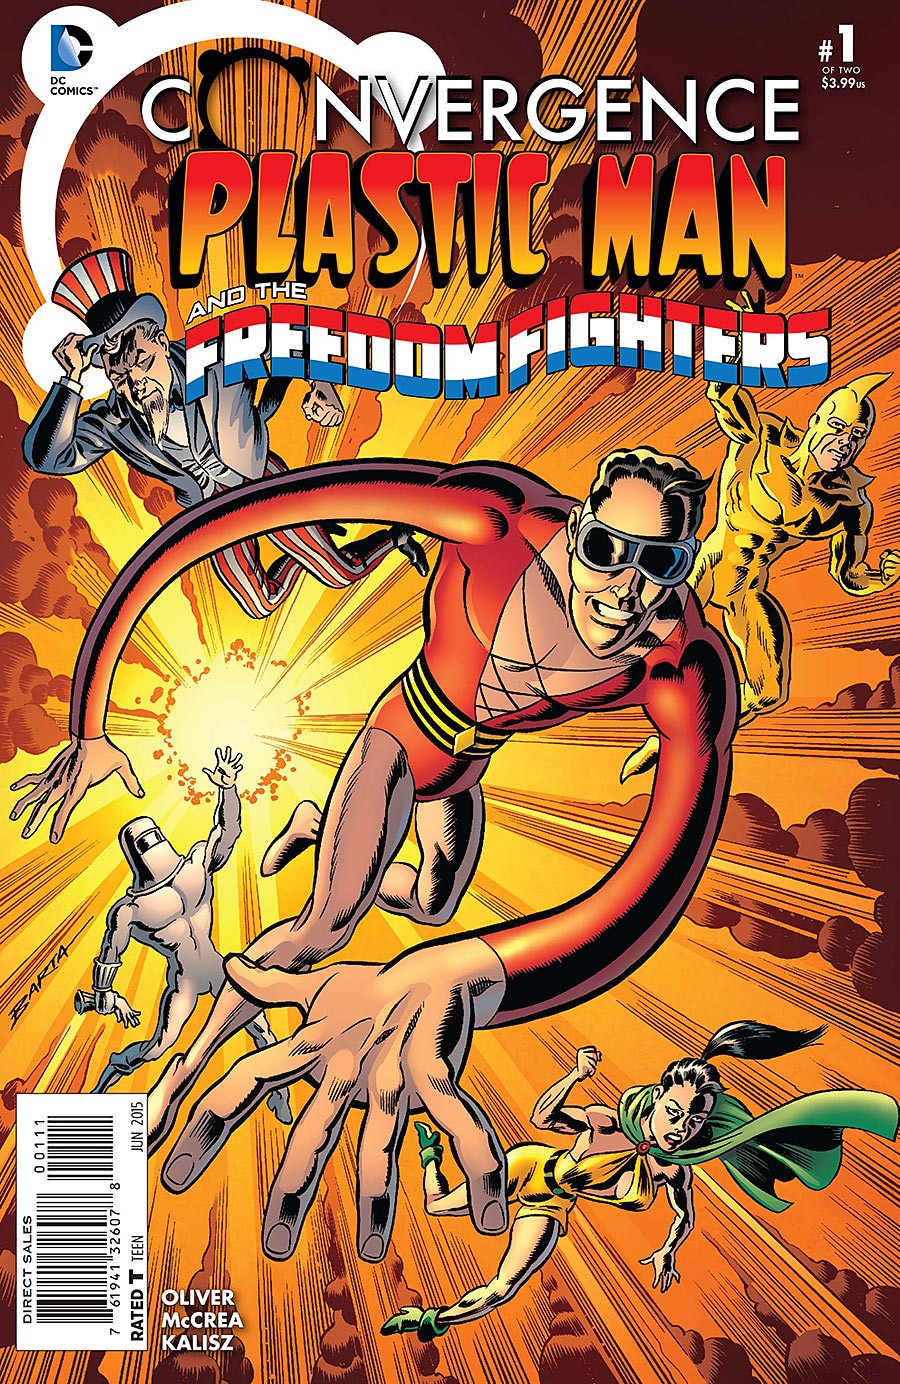 Convergence: Plastic Man and the Freedom Fighters Vol. 1 #1